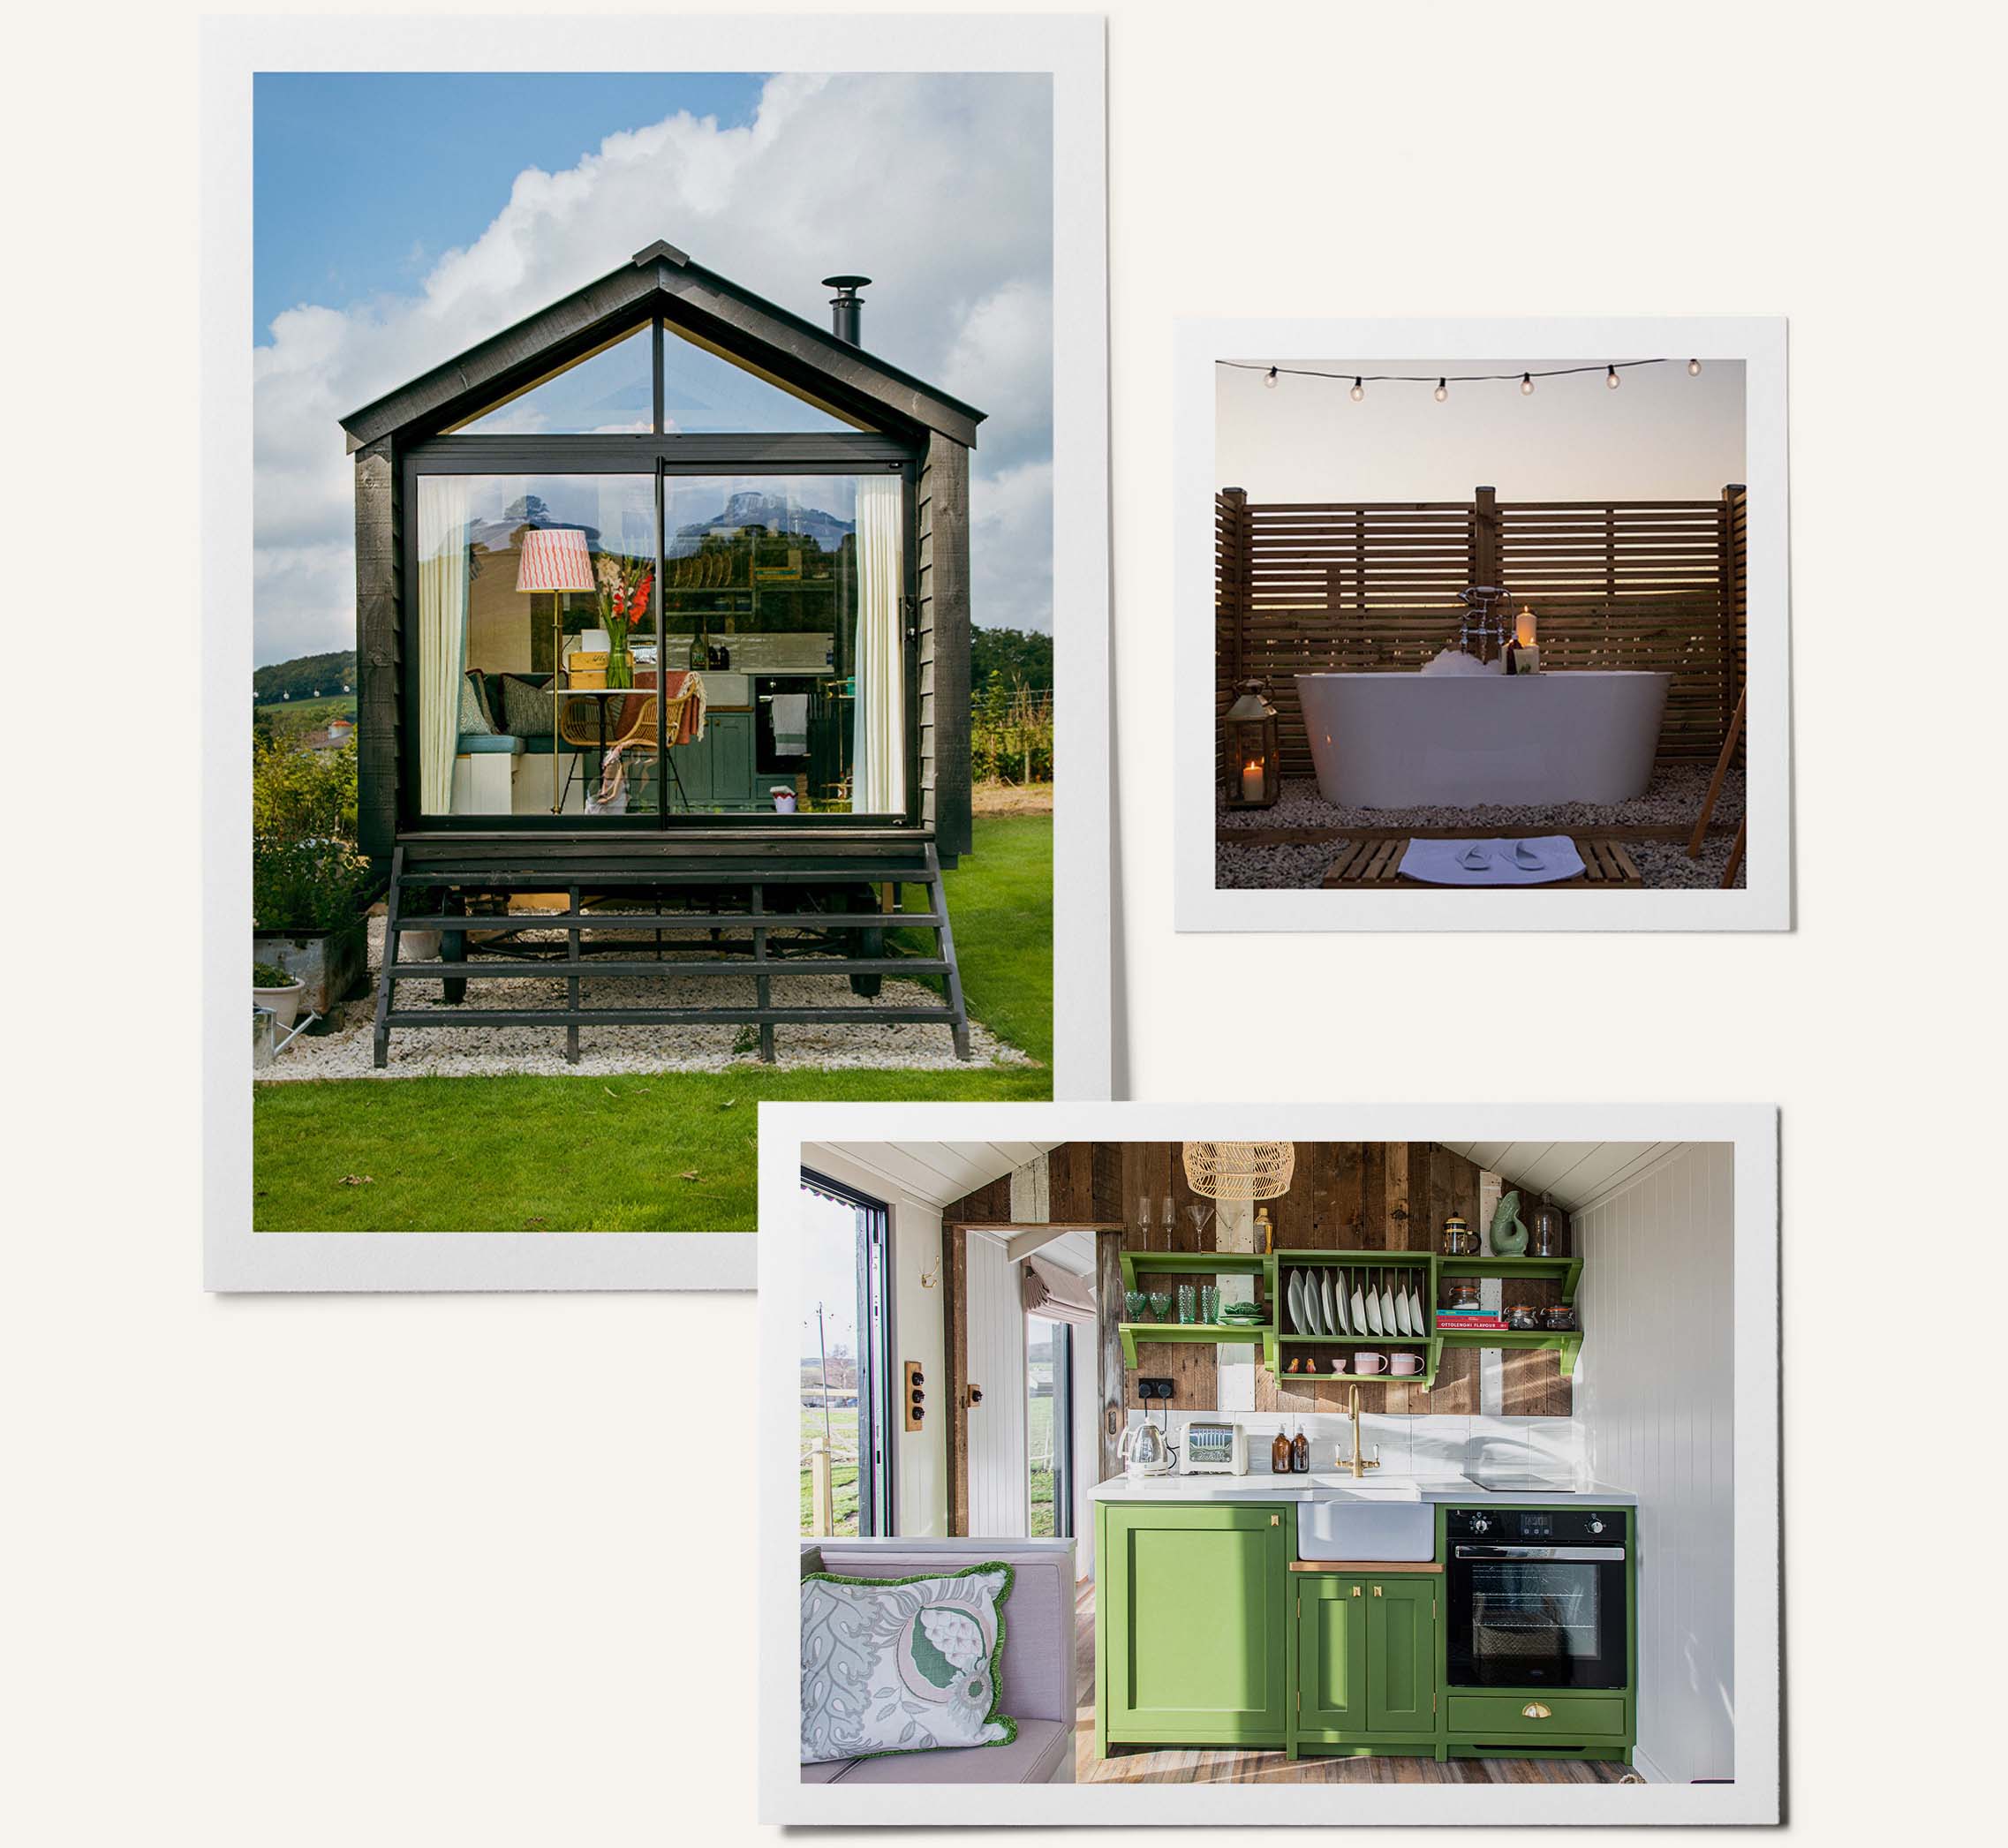 Three images show the exterior of a shepherds hut at Aller Dorset, an outdoor bath tub surrounded by wooden panels and the interior of the hut, with a bright green kitchenette.